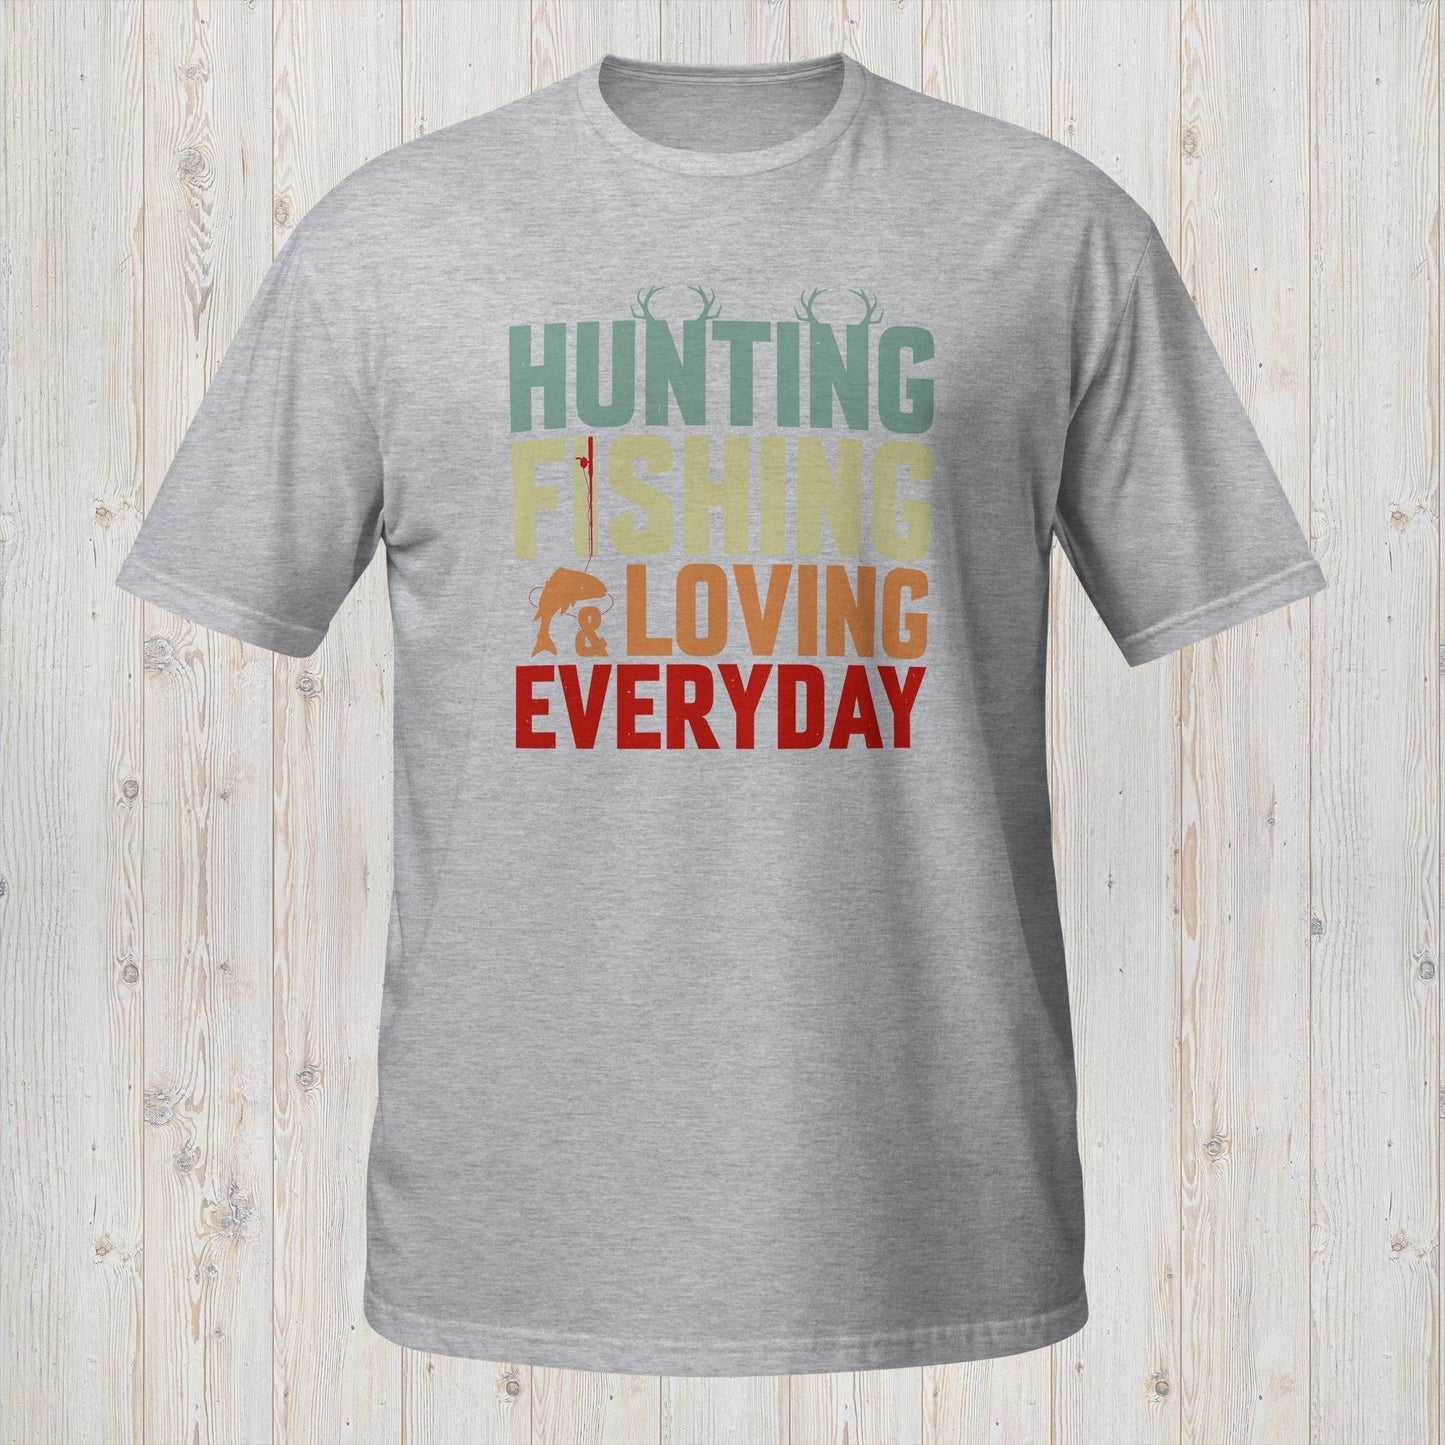 Outdoor Enthusiast Tee - Hunting, Fishing, and Loving Everyday